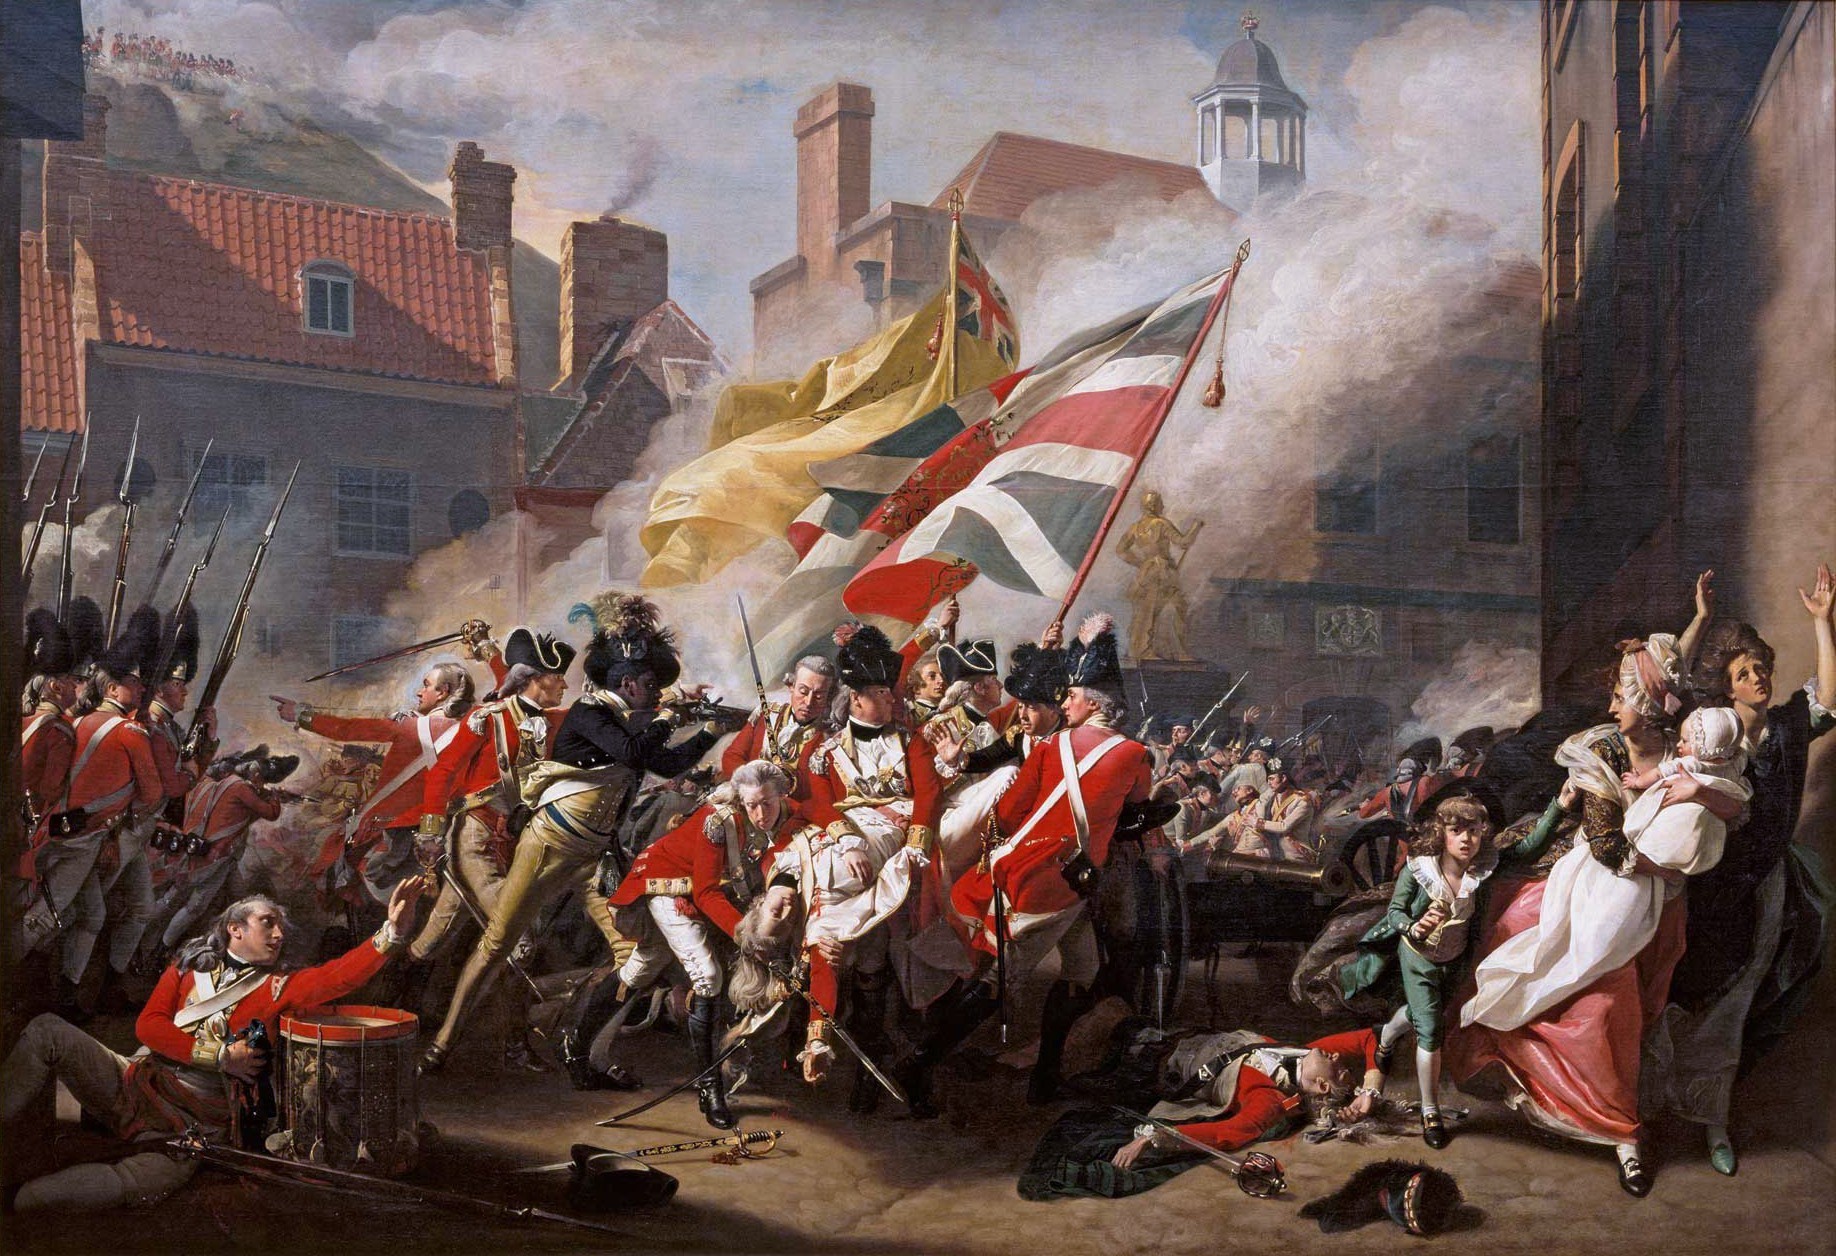 "The Death of Major Peirson, 6 January 1781" by John Singleton Copley (1783). Source: Jersey Museum and Art Gallery, via Wikimedia Commons. Public domain.